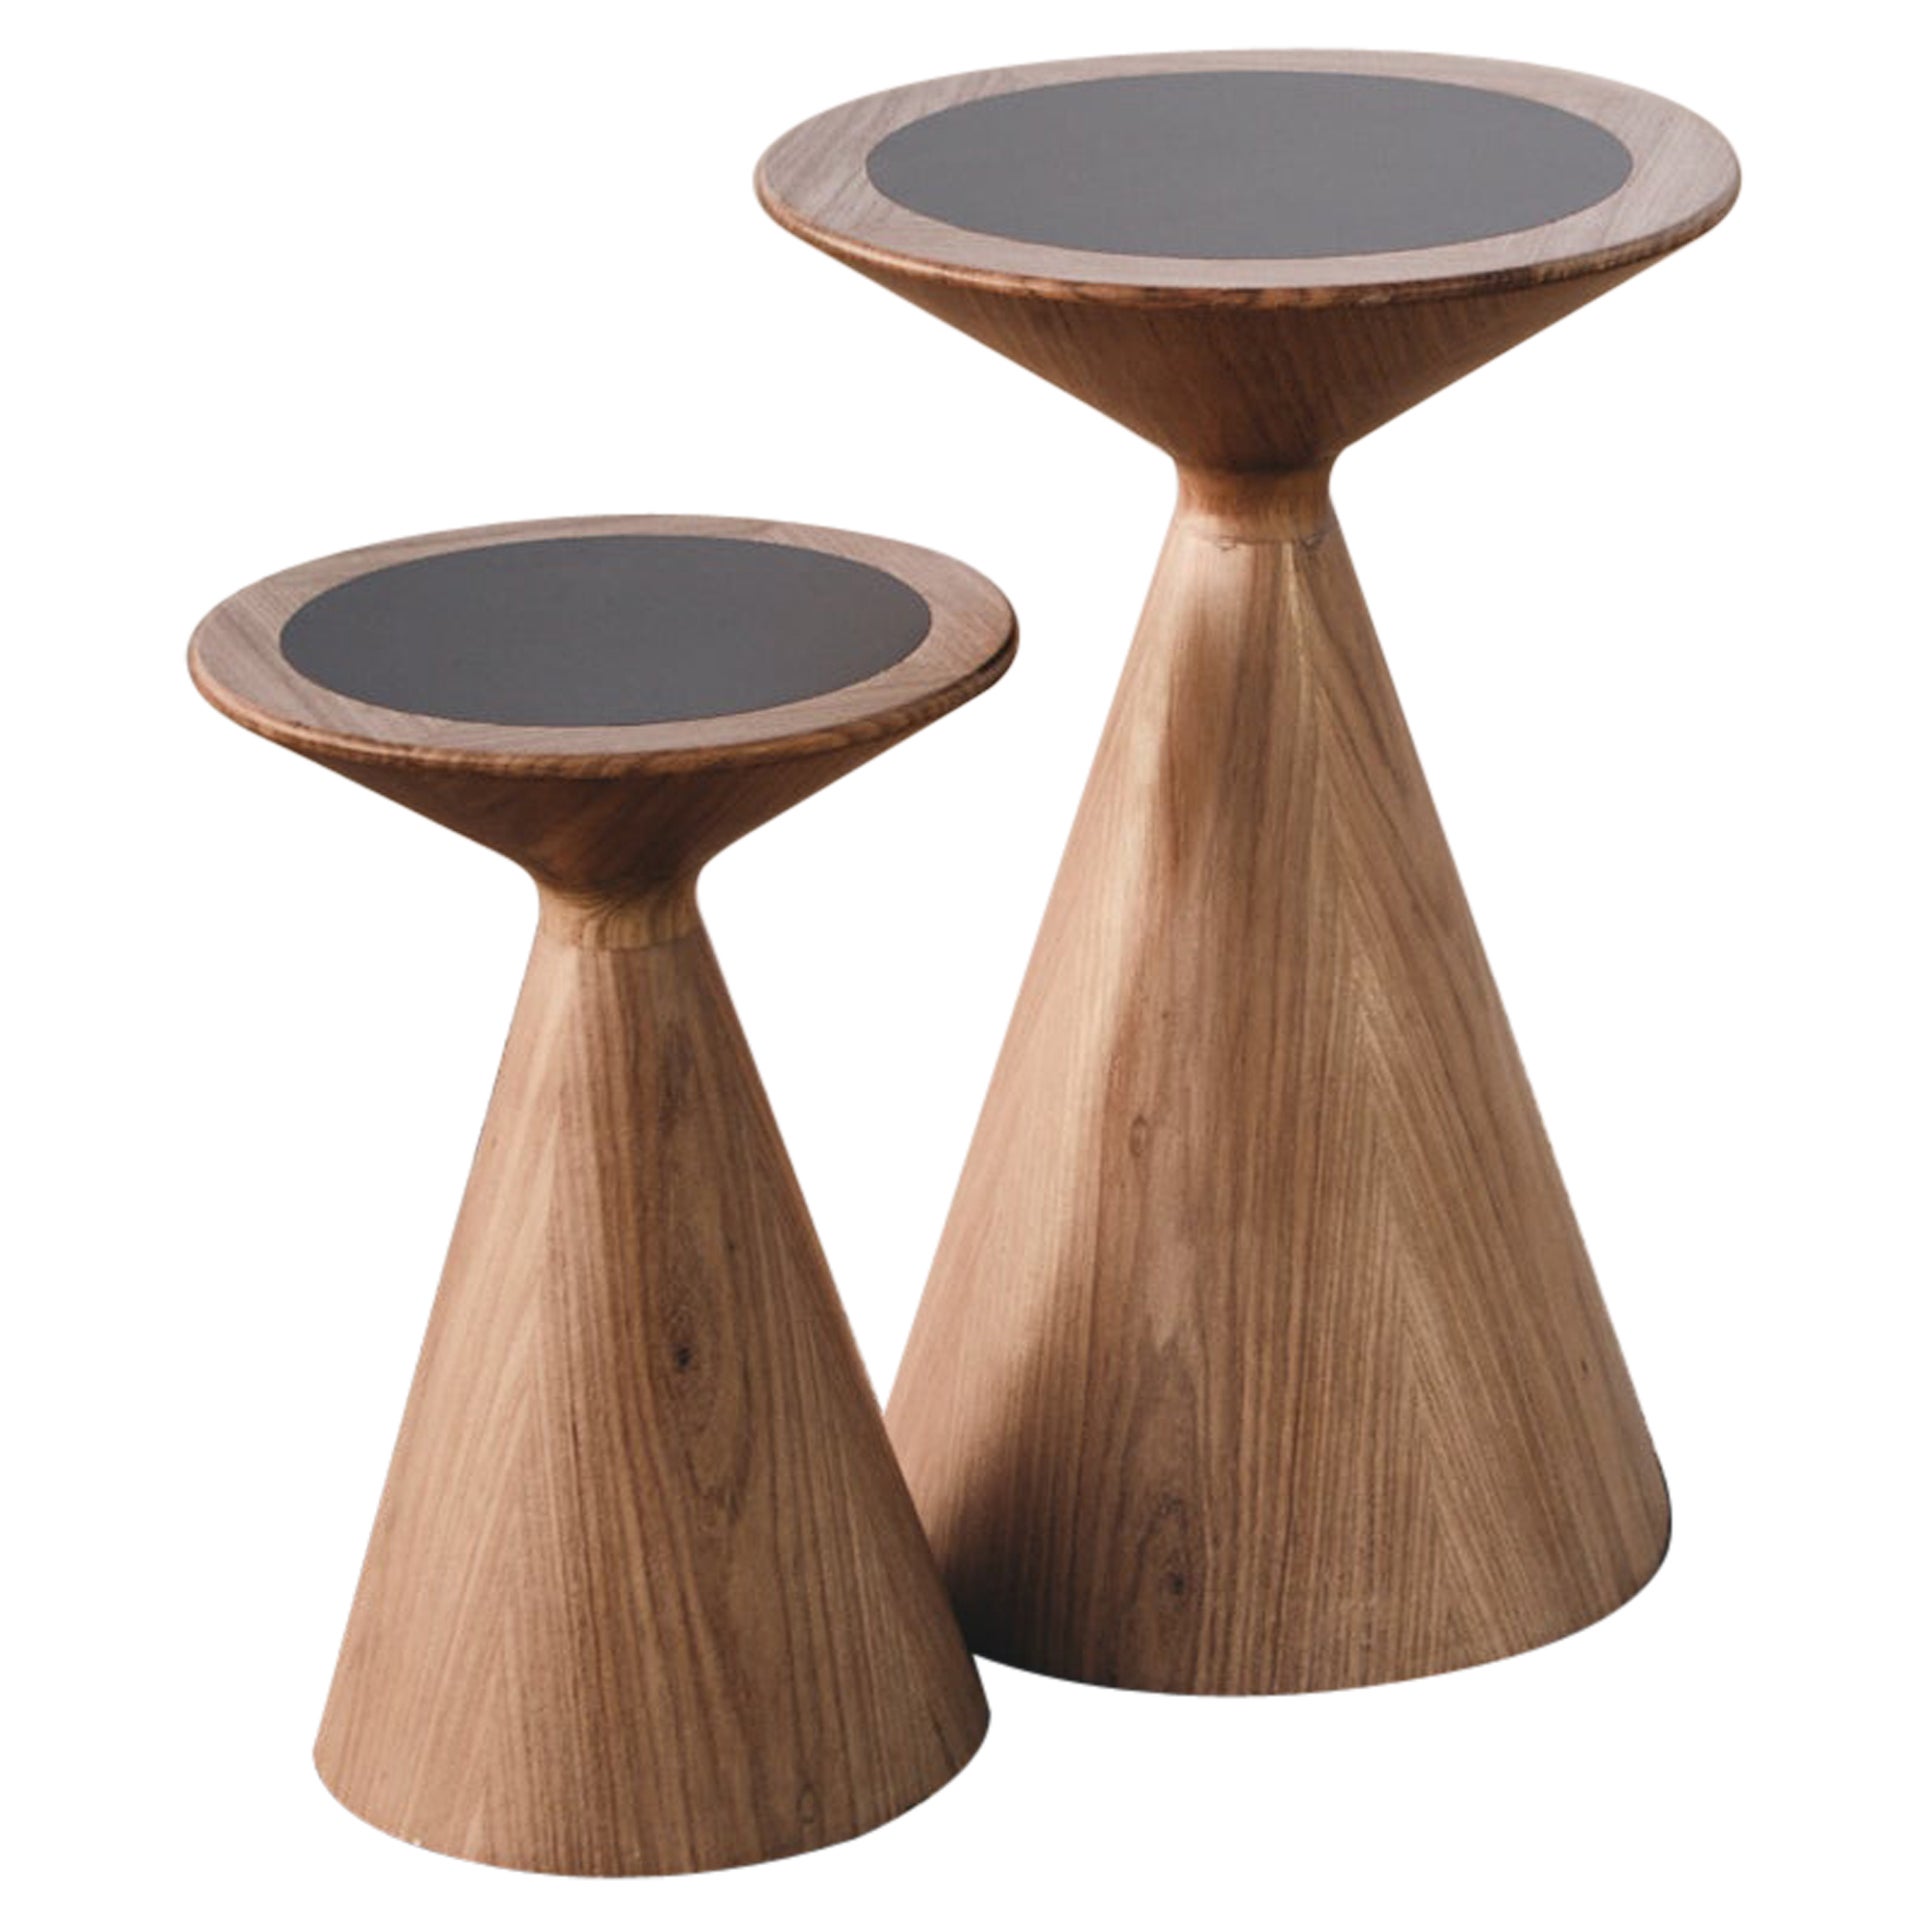 Carioca Large Sidetable and Stool in Freijo Wood